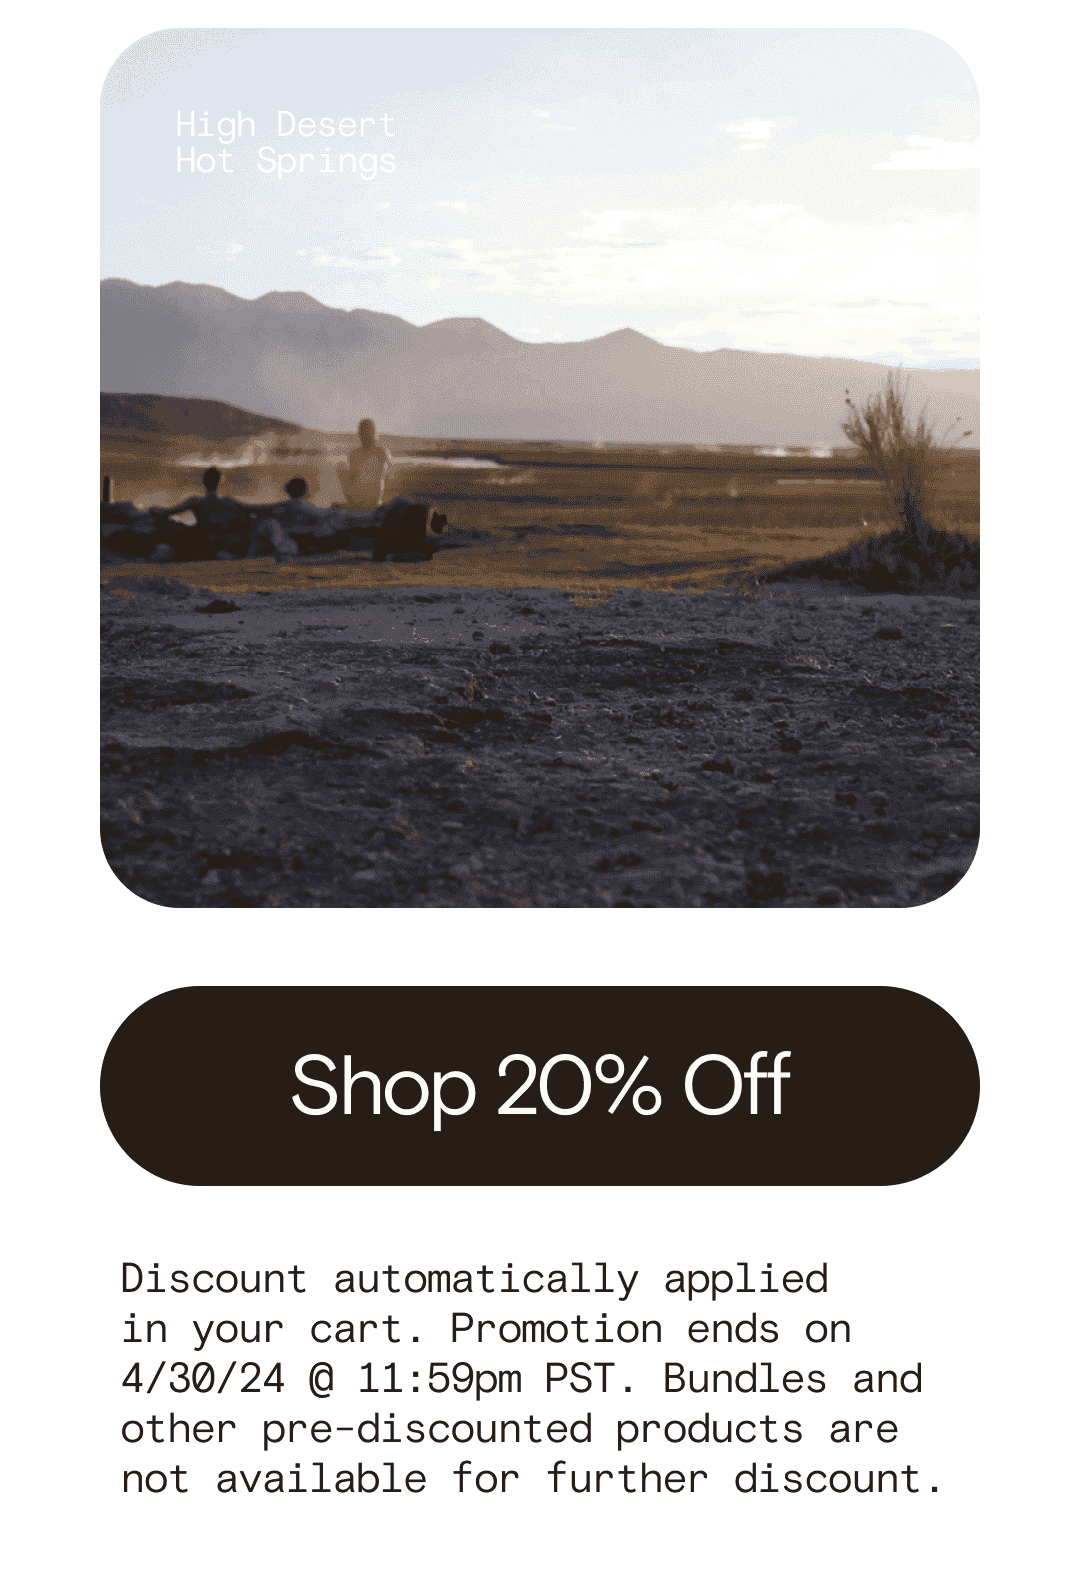 High Desert Hot Springs Shop 20% Off Discount automatically applied  in your cart. Promotion ends on 4/30/24 @ 11:59pm PST. Bundles and other pre-discounted products are not available for further discount.